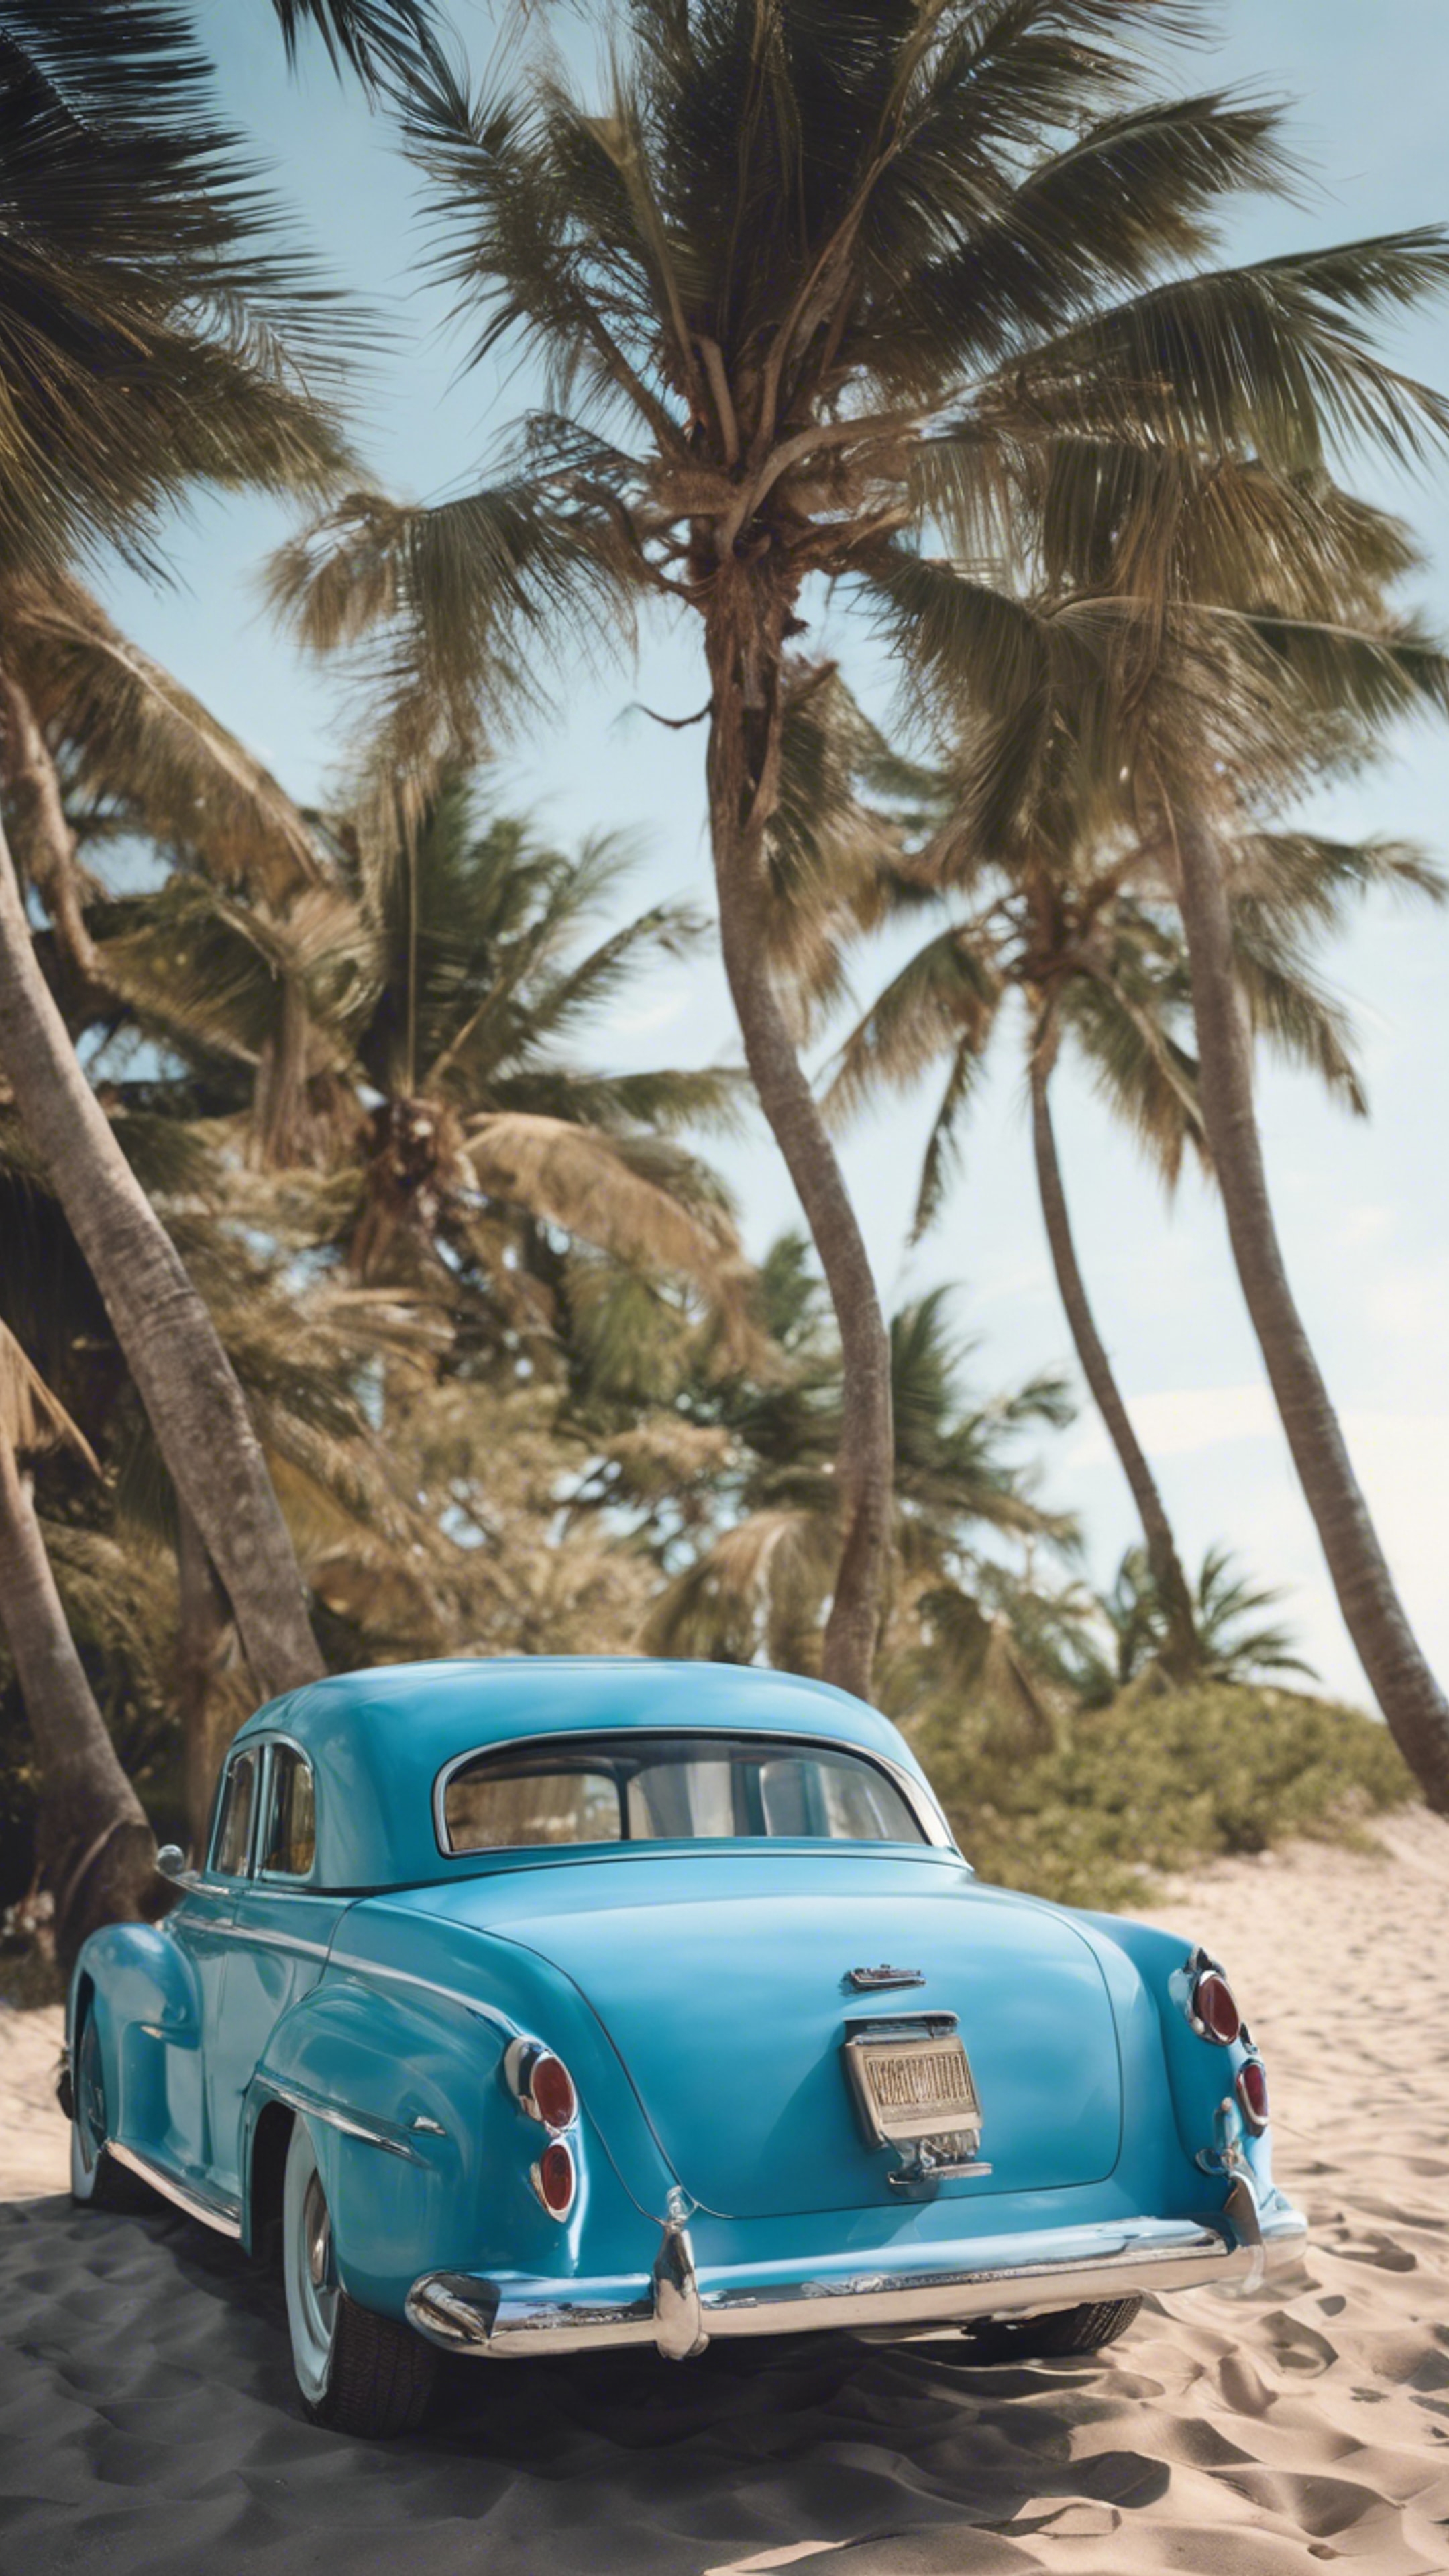 A vintage car painted in cool blue, parked by the beach壁紙[7559f4037ca44818afd1]